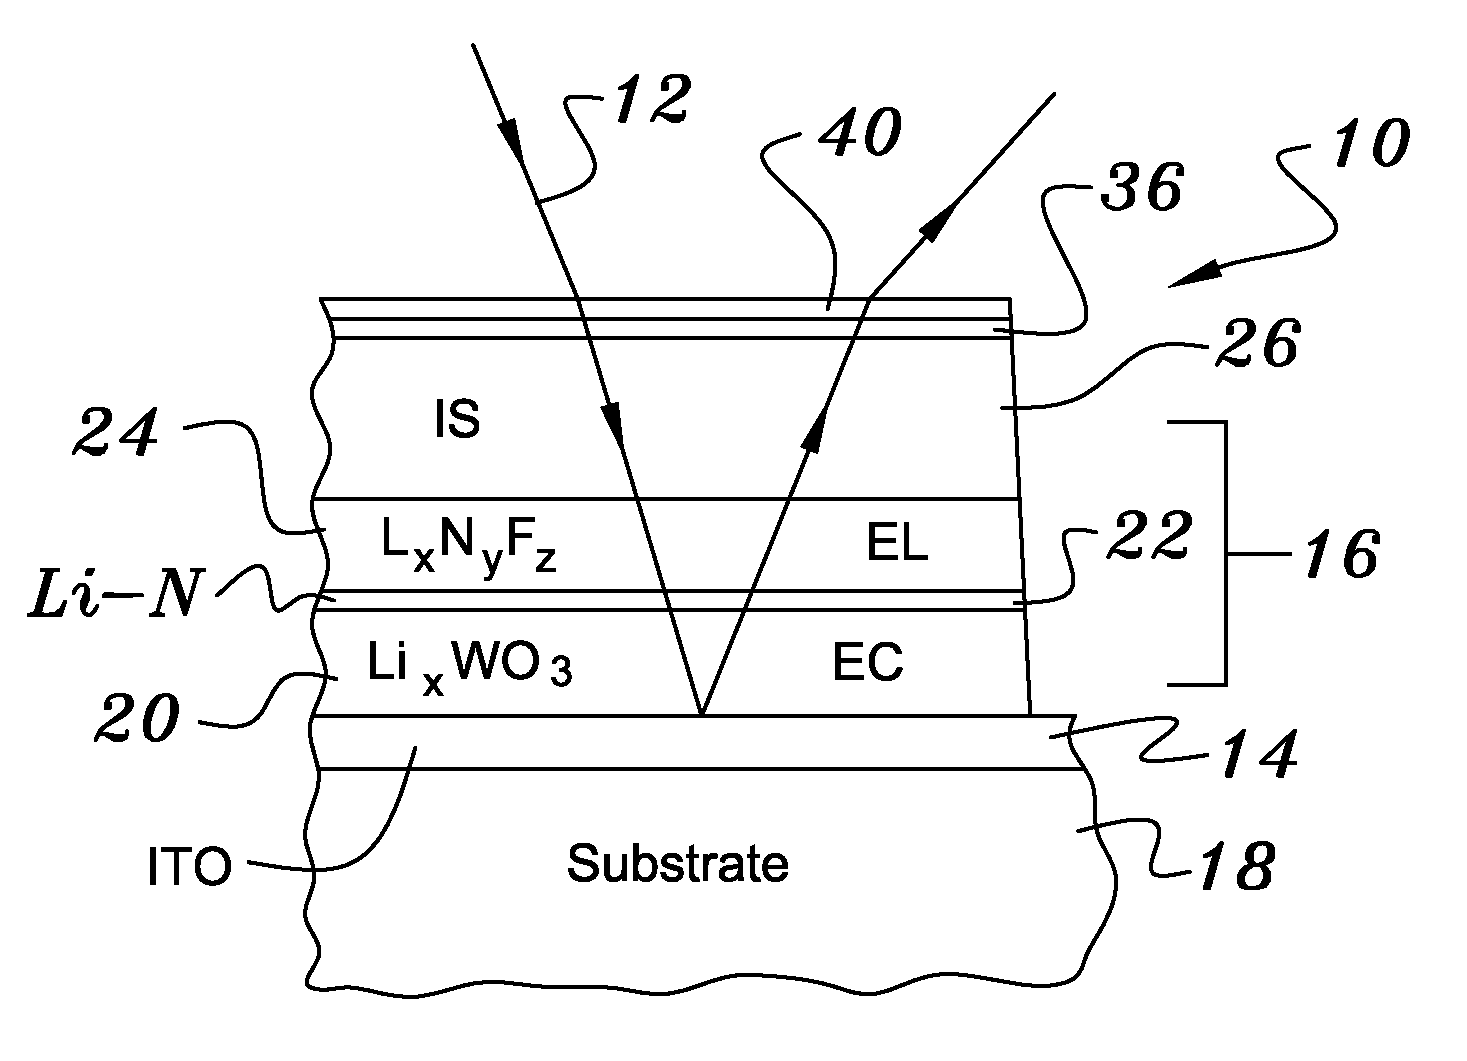 Electrochromic infrared tunable filter and emissivity modulator